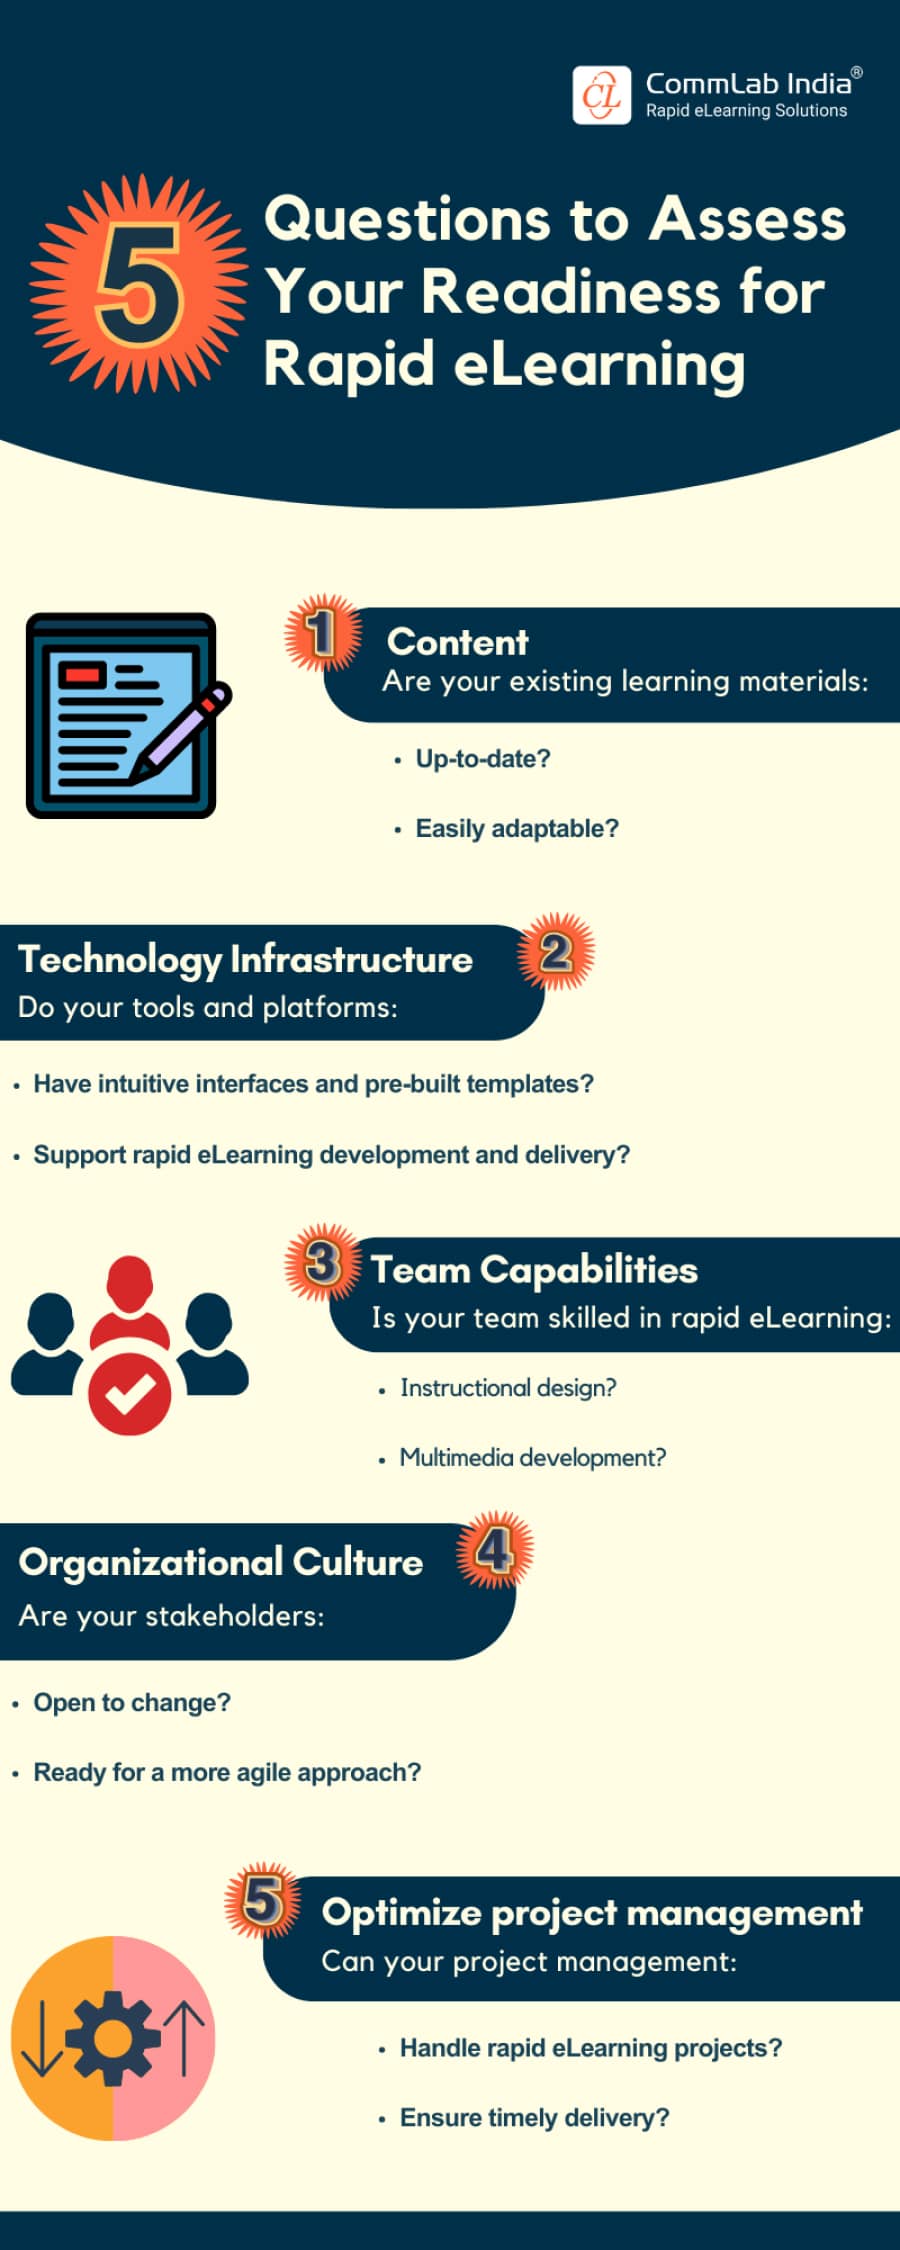 5 Questions to Assess Your Readiness for Rapid eLearning